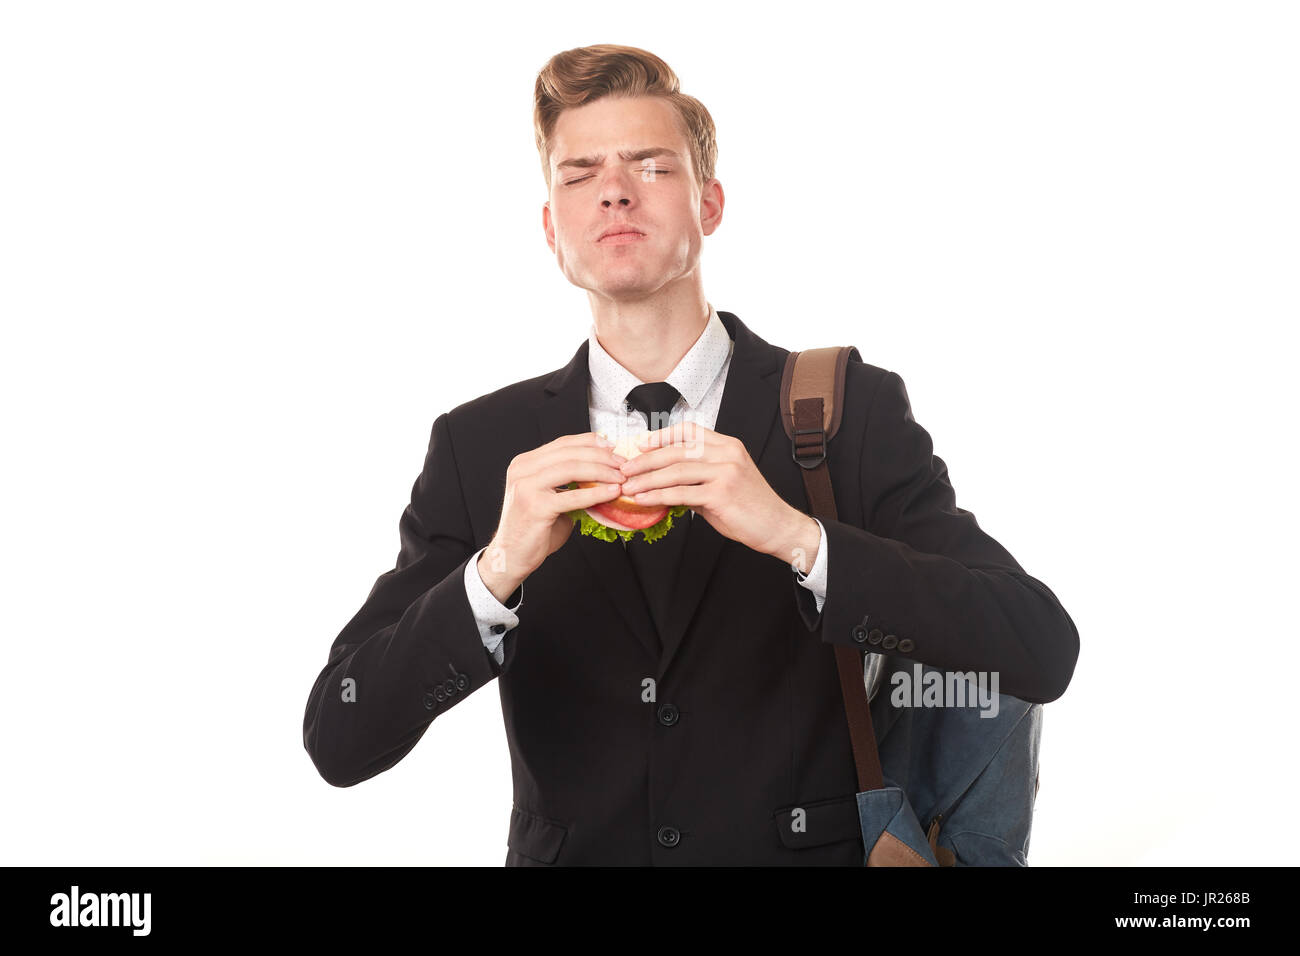 College student eating sandwich Stock Photo